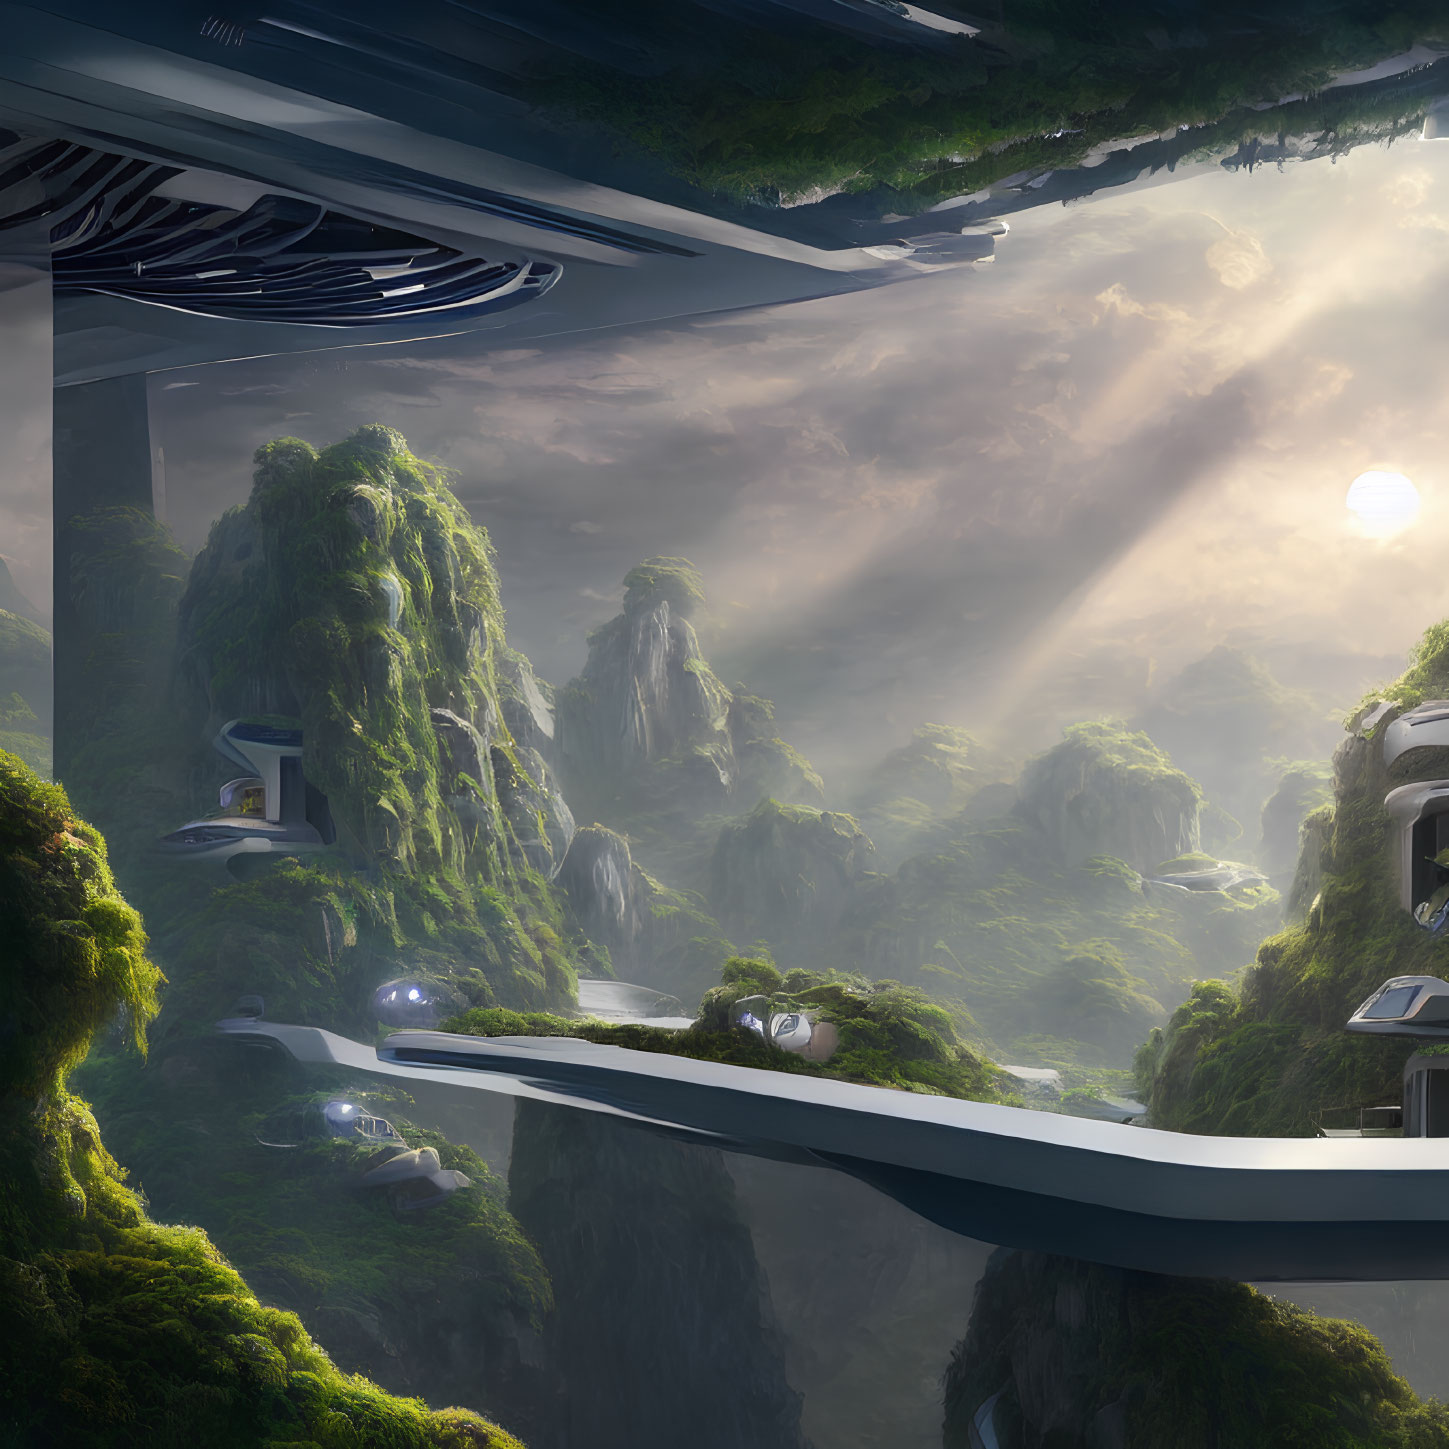 Futuristic cityscape with green mountains, sleek buildings, and elevated roads under sunlight.